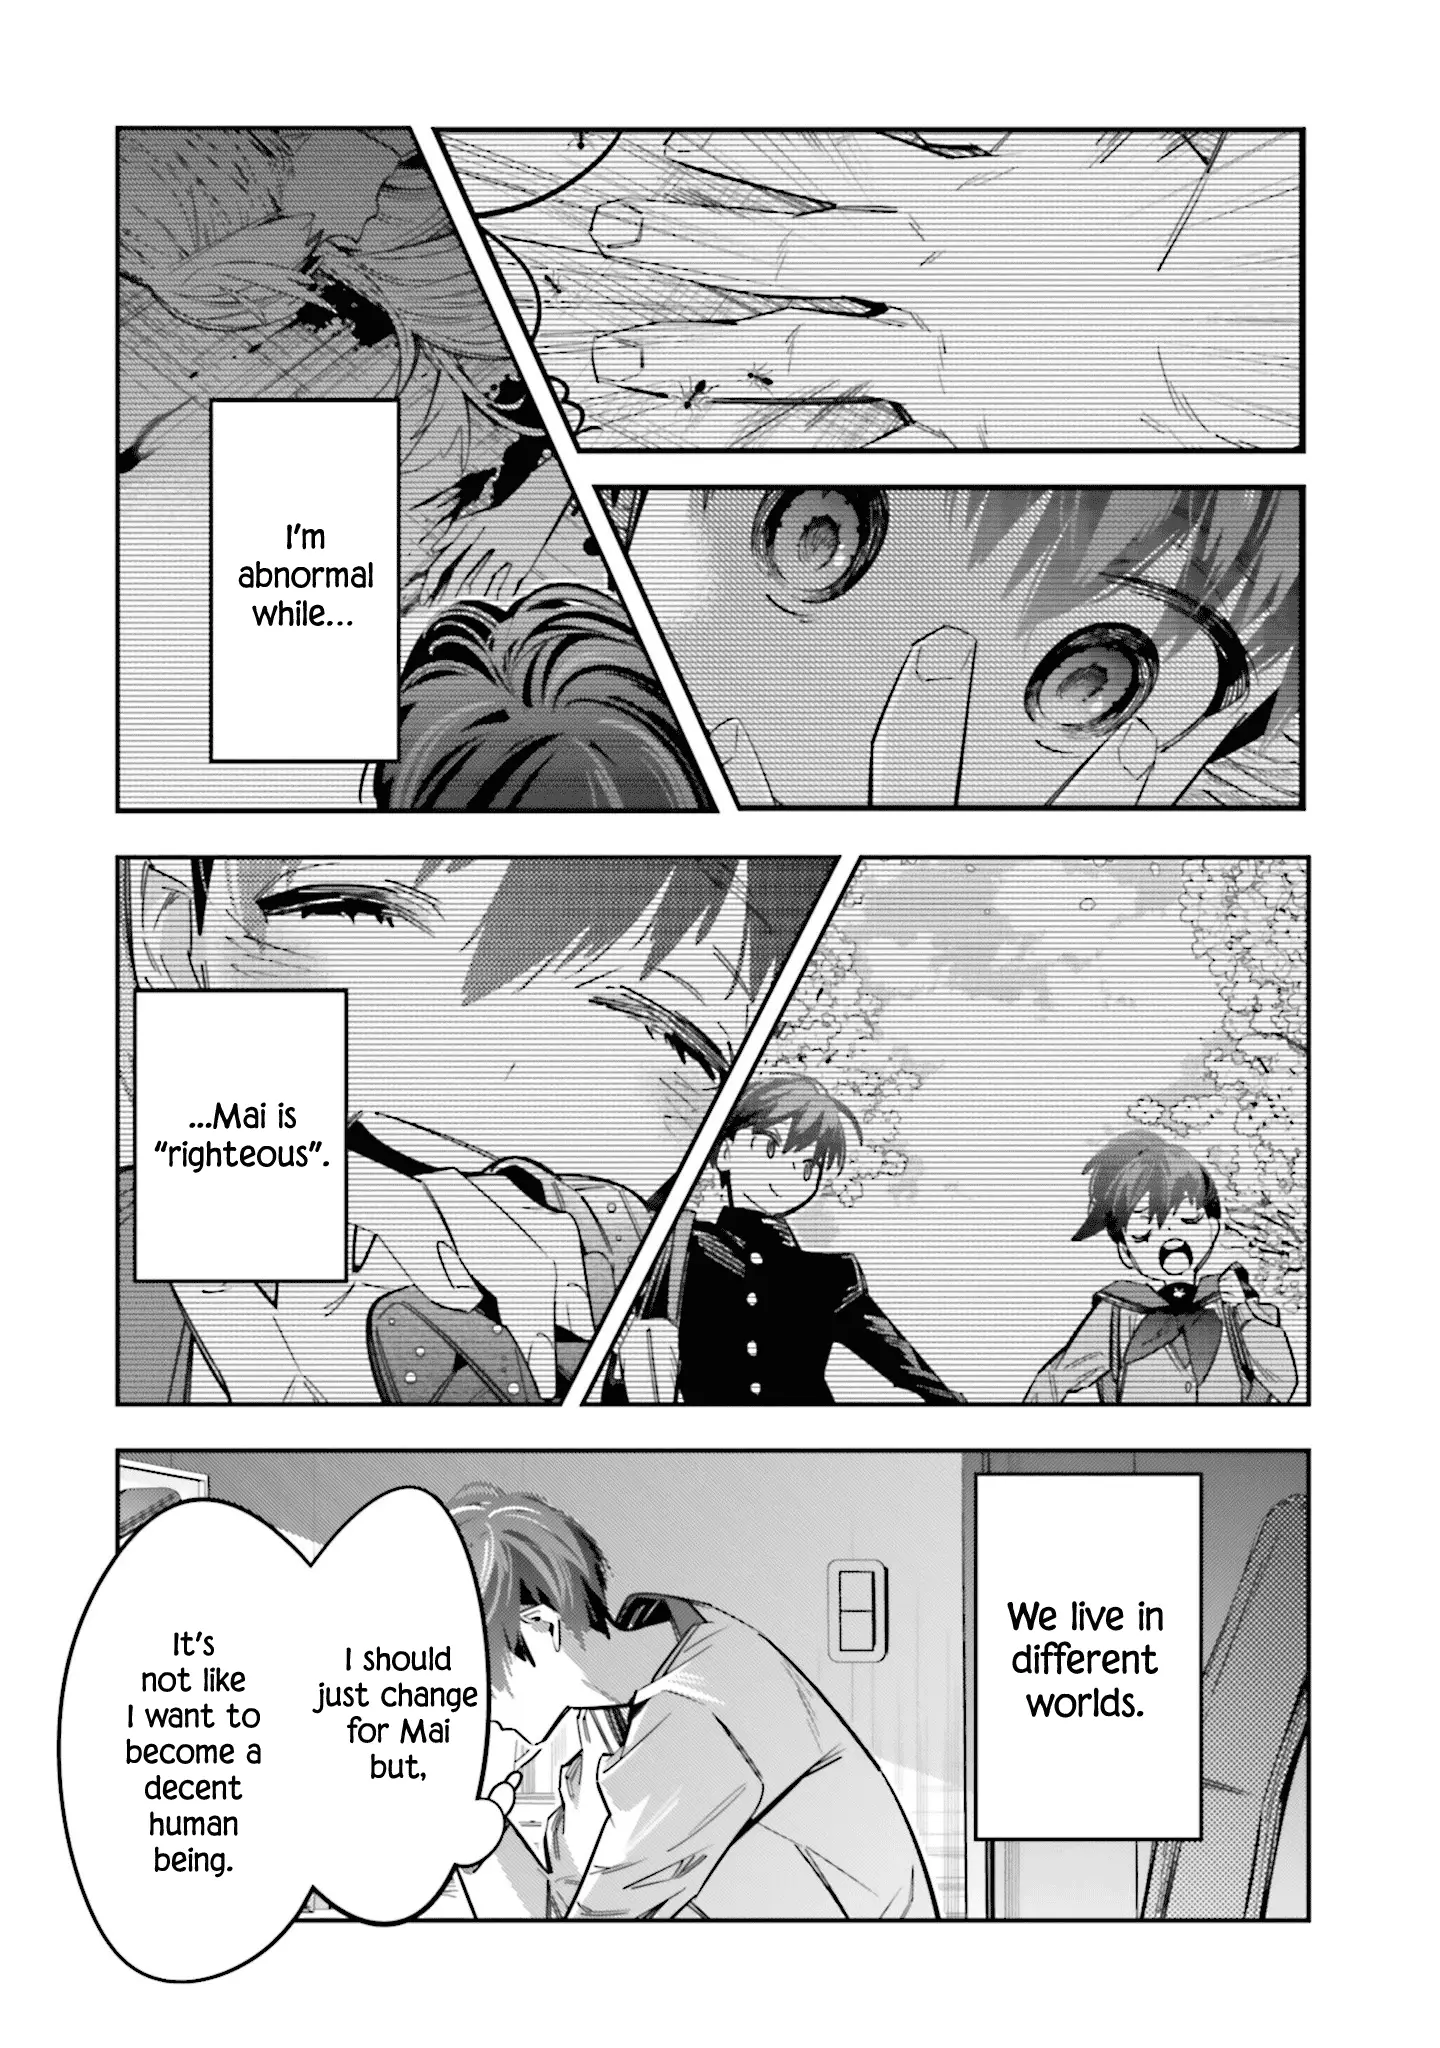 I Reincarnated As The Little Sister Of A Death Game Manga's Murder Mastermind And Failed - 9 page 3-f310d86e